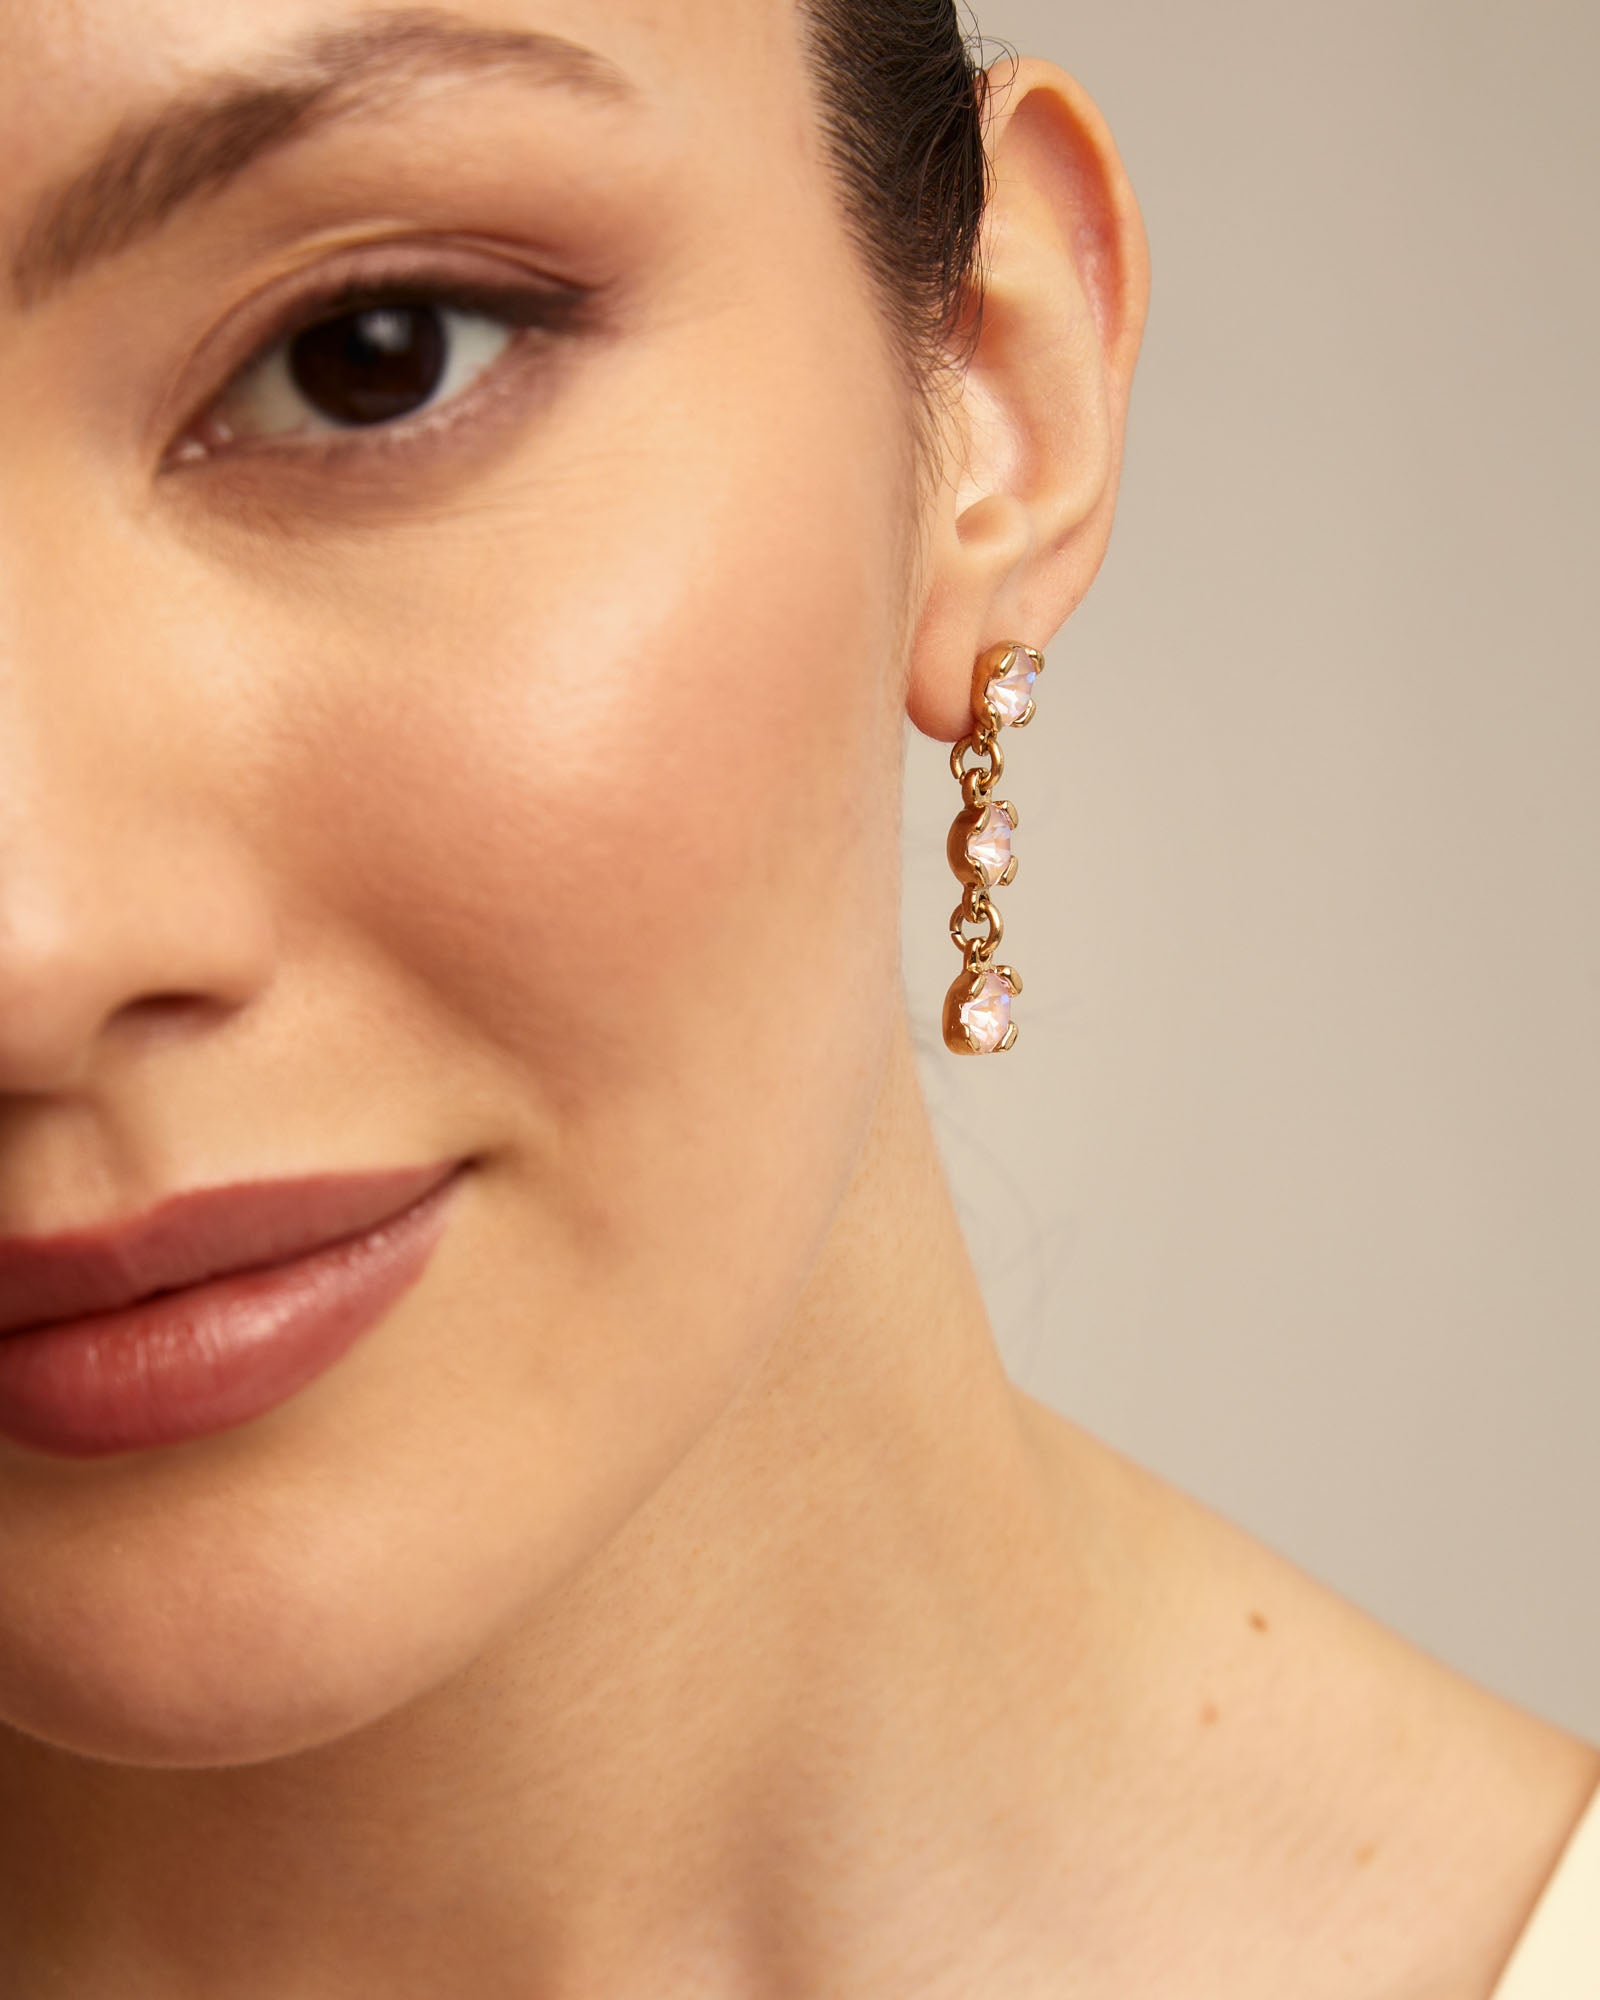 UNOde50 Sublime Pink Gold Earrings